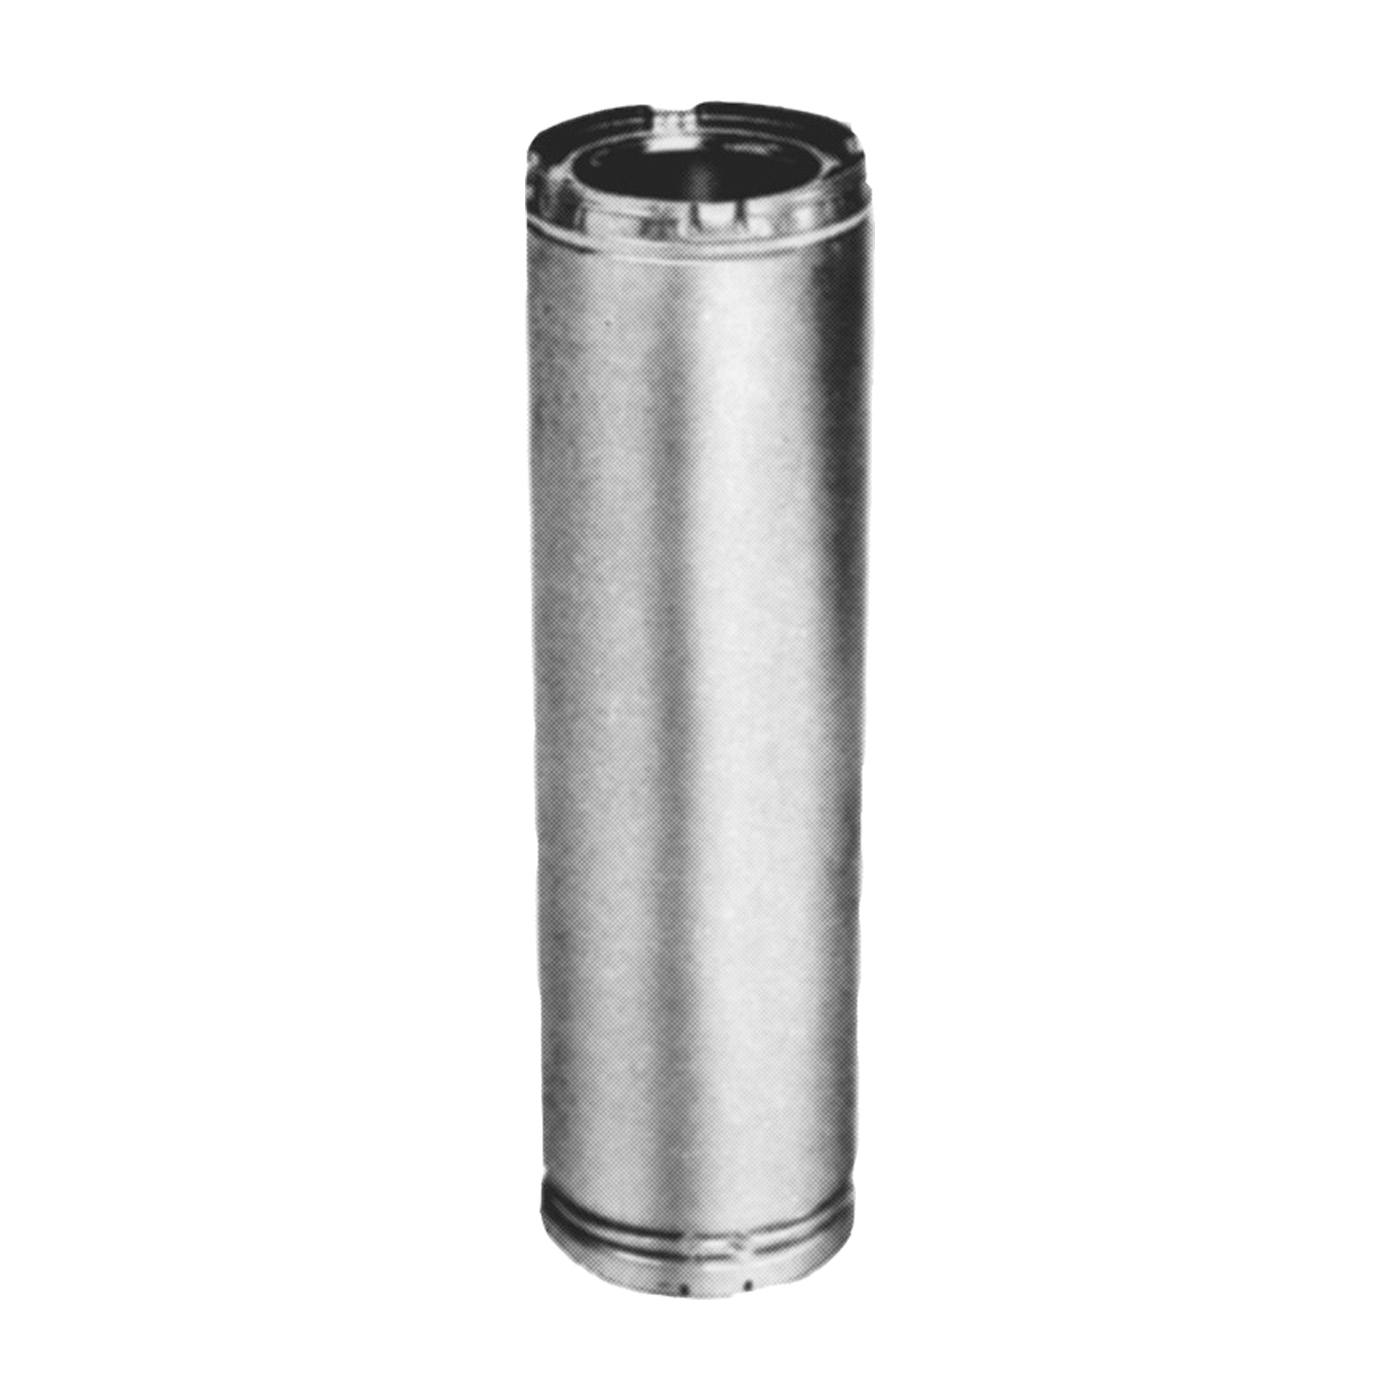 8HS-12 Chimney Pipe, 11 in OD, 12 in L, Galvanized Stainless Steel